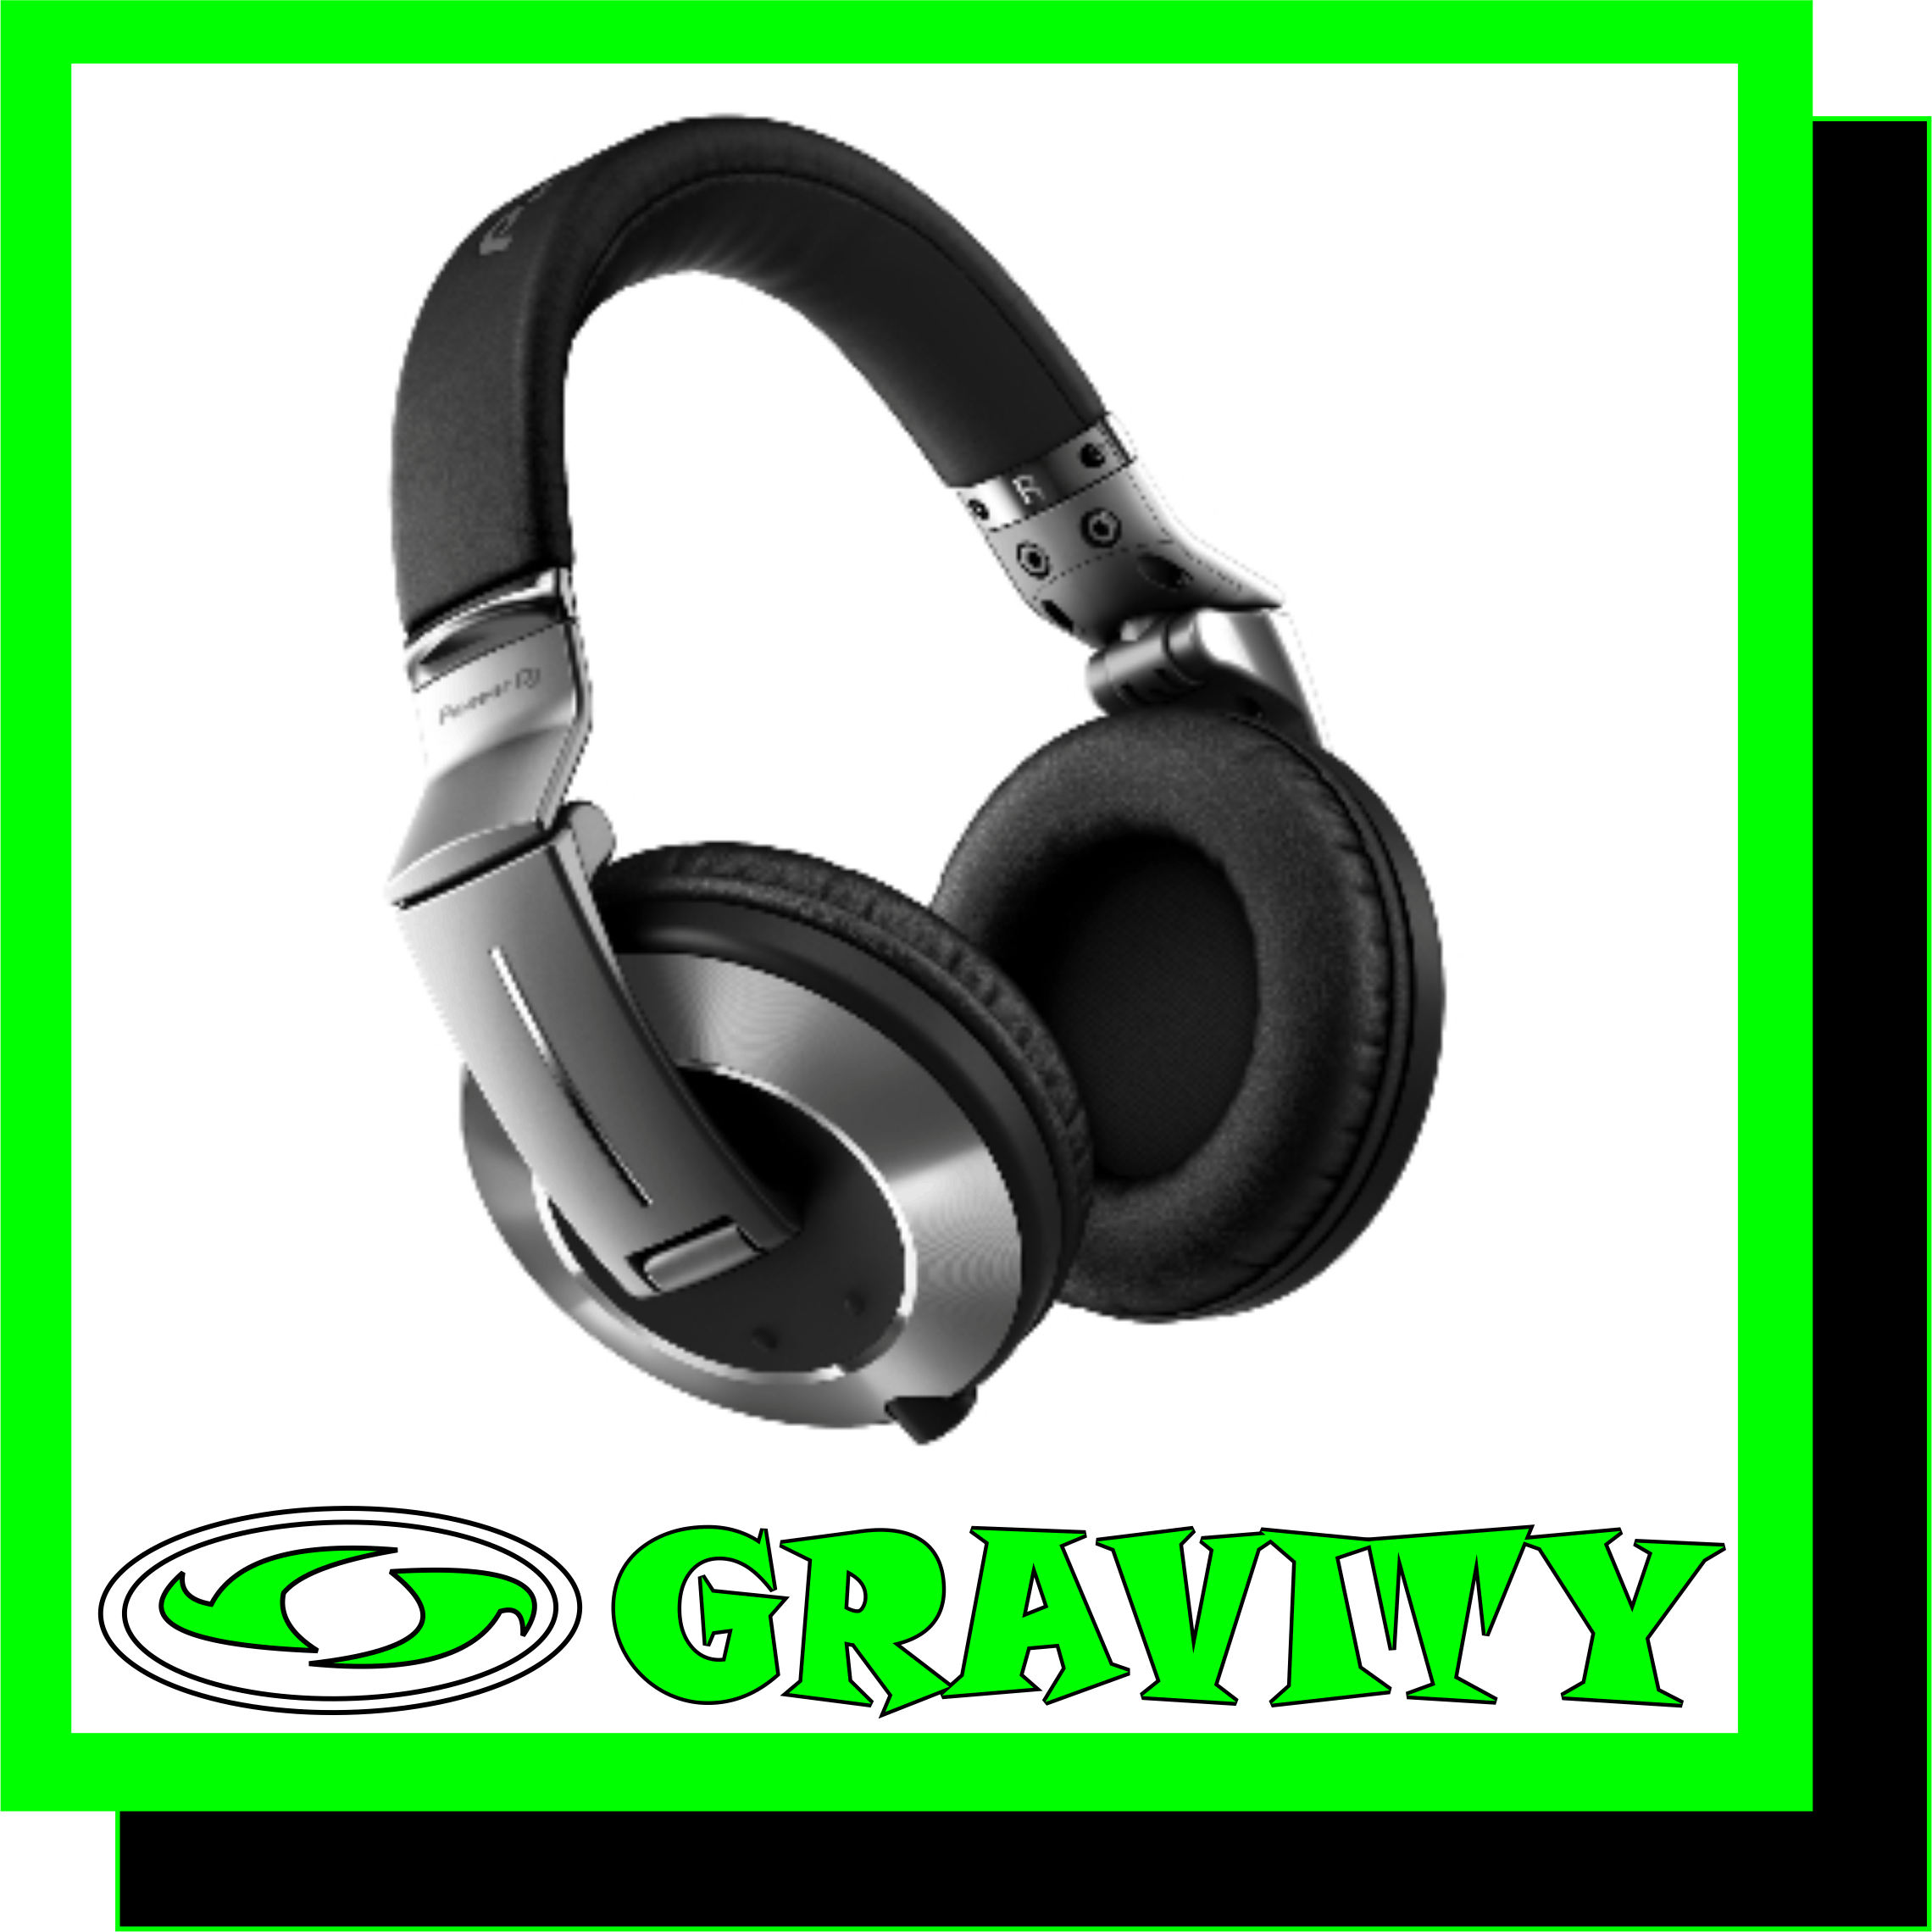 HDJ2000MK2-S @ R6 000.00  Flagship Professional DJ Headphones  High-fidelity sound design optimized for all DJs Improved air chamber for better sound isolation Durable, ergonomic headband design L-shaped headphone plug with coiled and straight cords Stylish and compact protective 